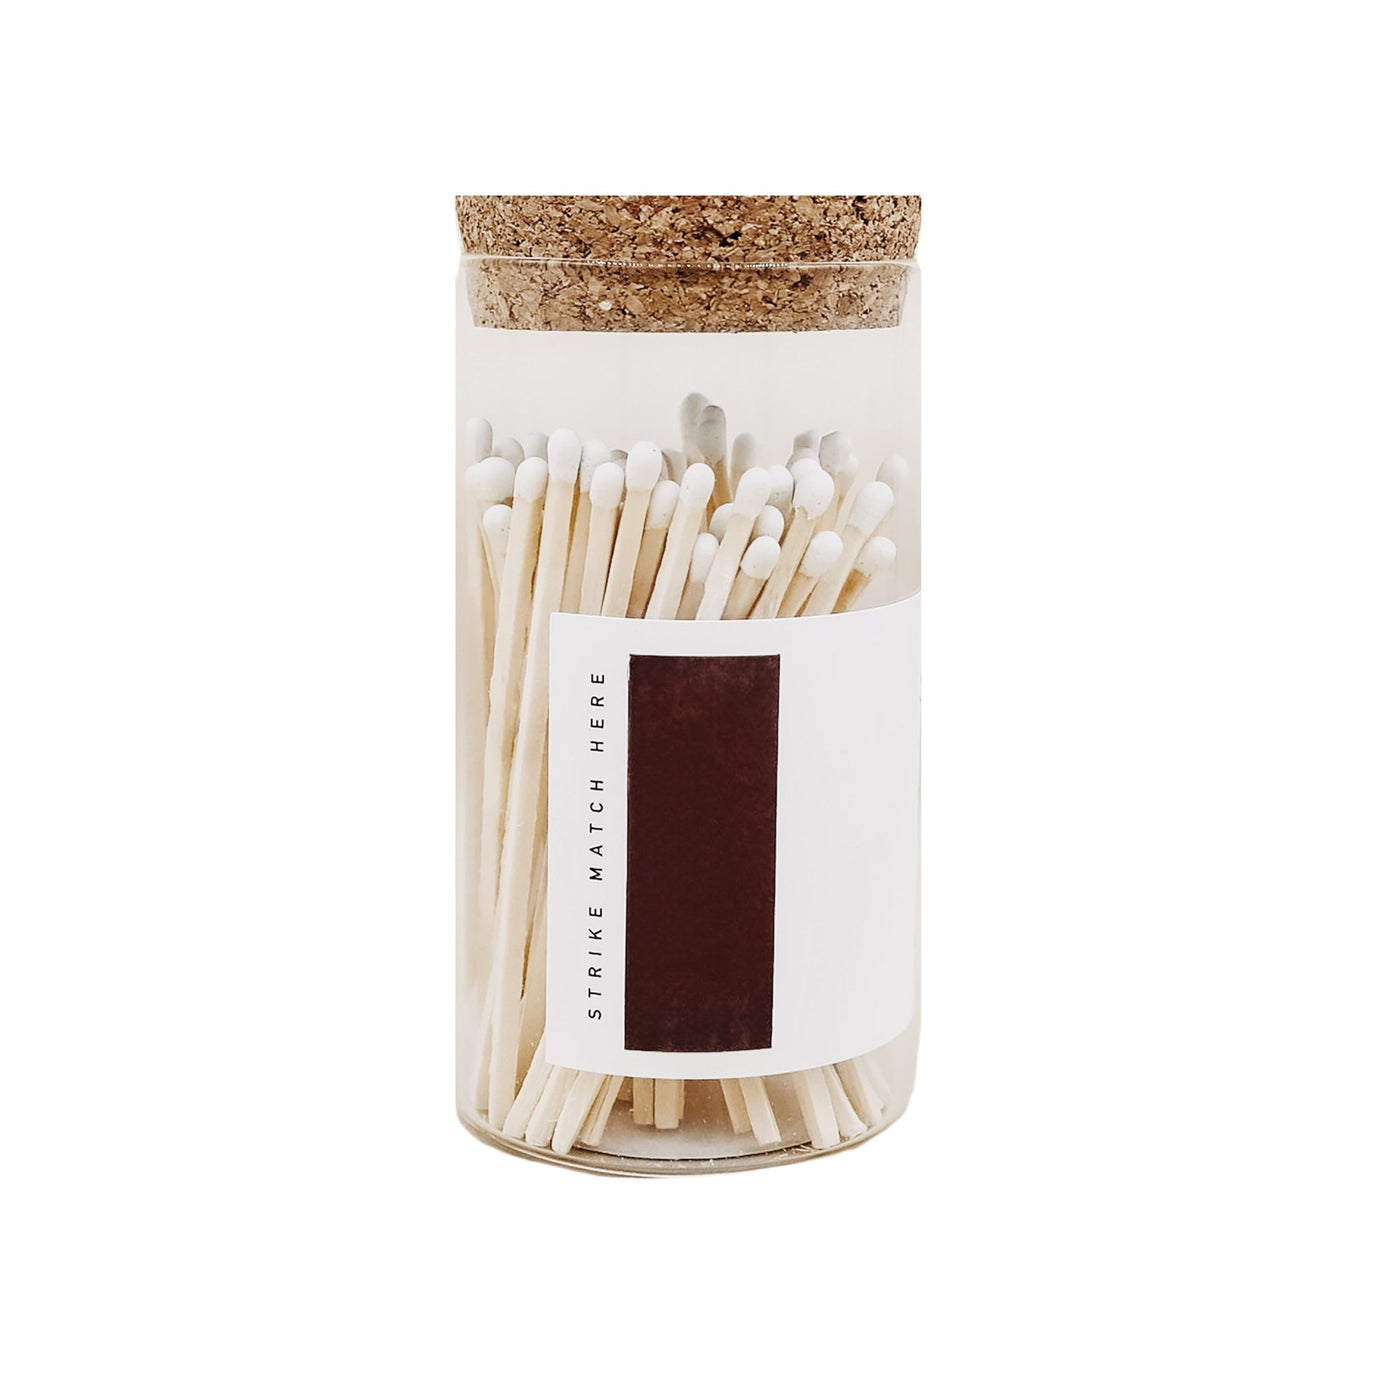 White Tip Medium Hearth Matches - 100 Count, 4" - Sweet Water Decor - Matches